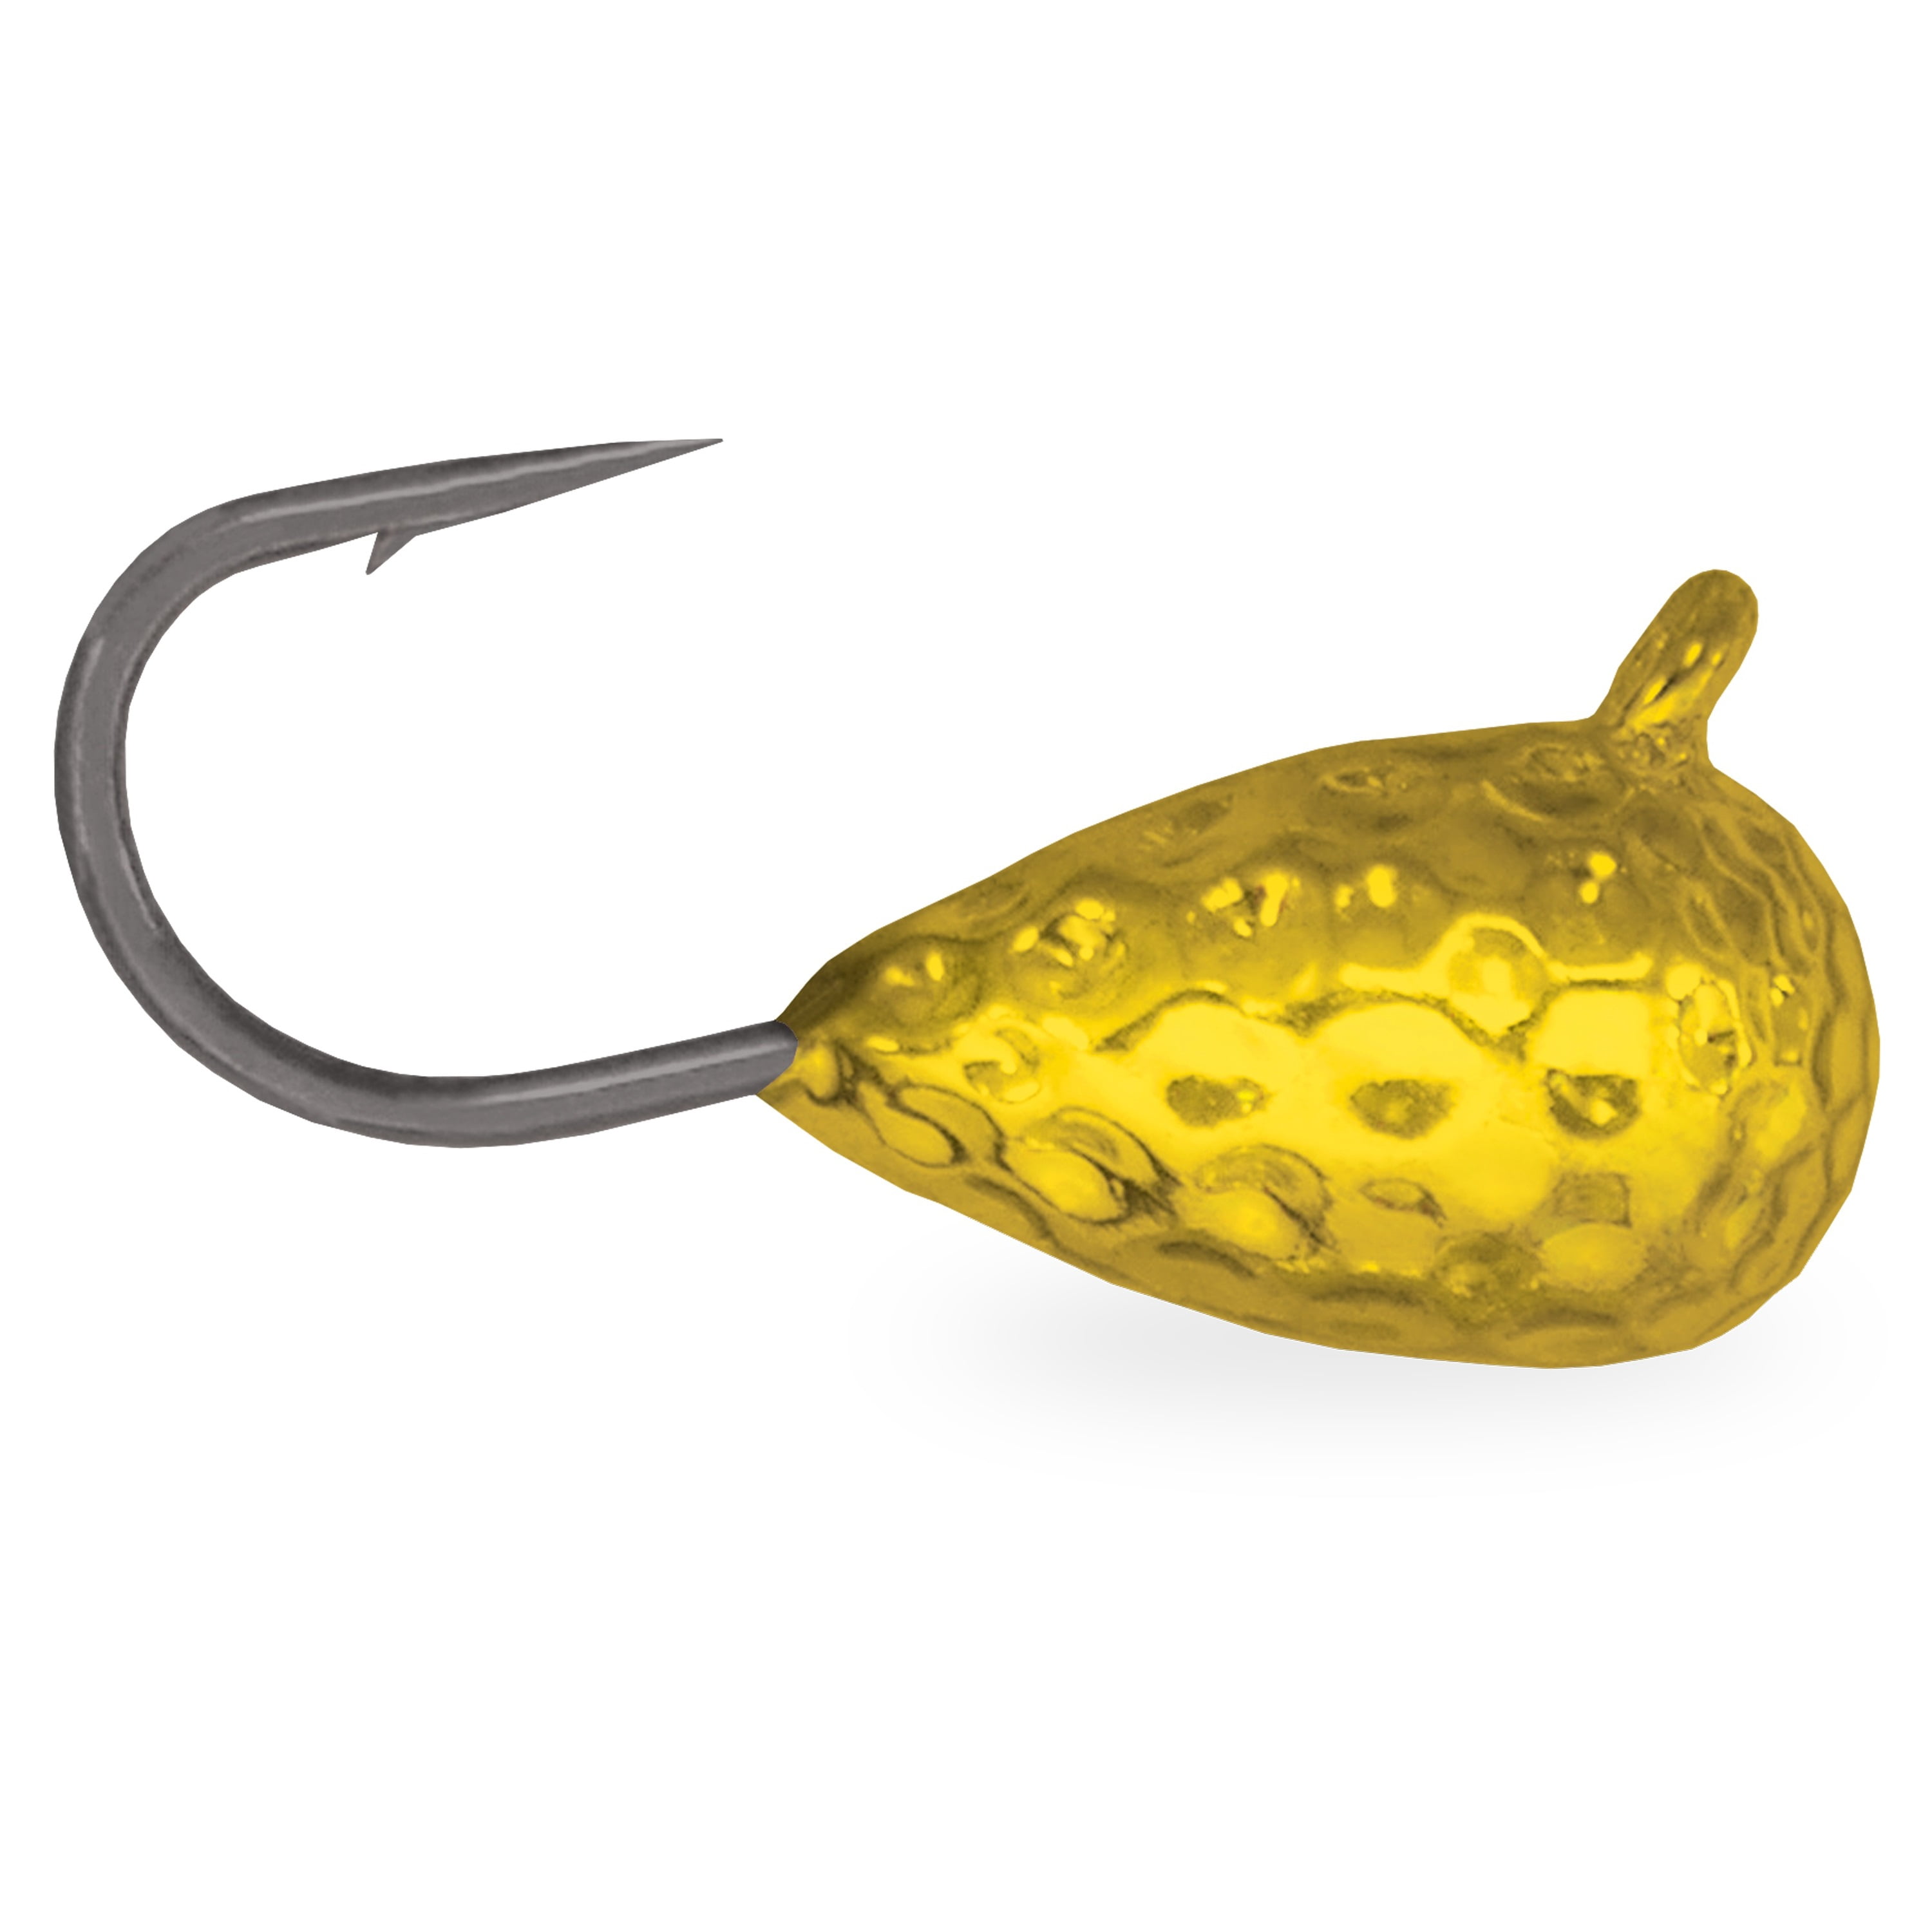 Acme Tackle Pro Grade Hammered Tungsten Fishing Jig, Gold, 3mm, 2